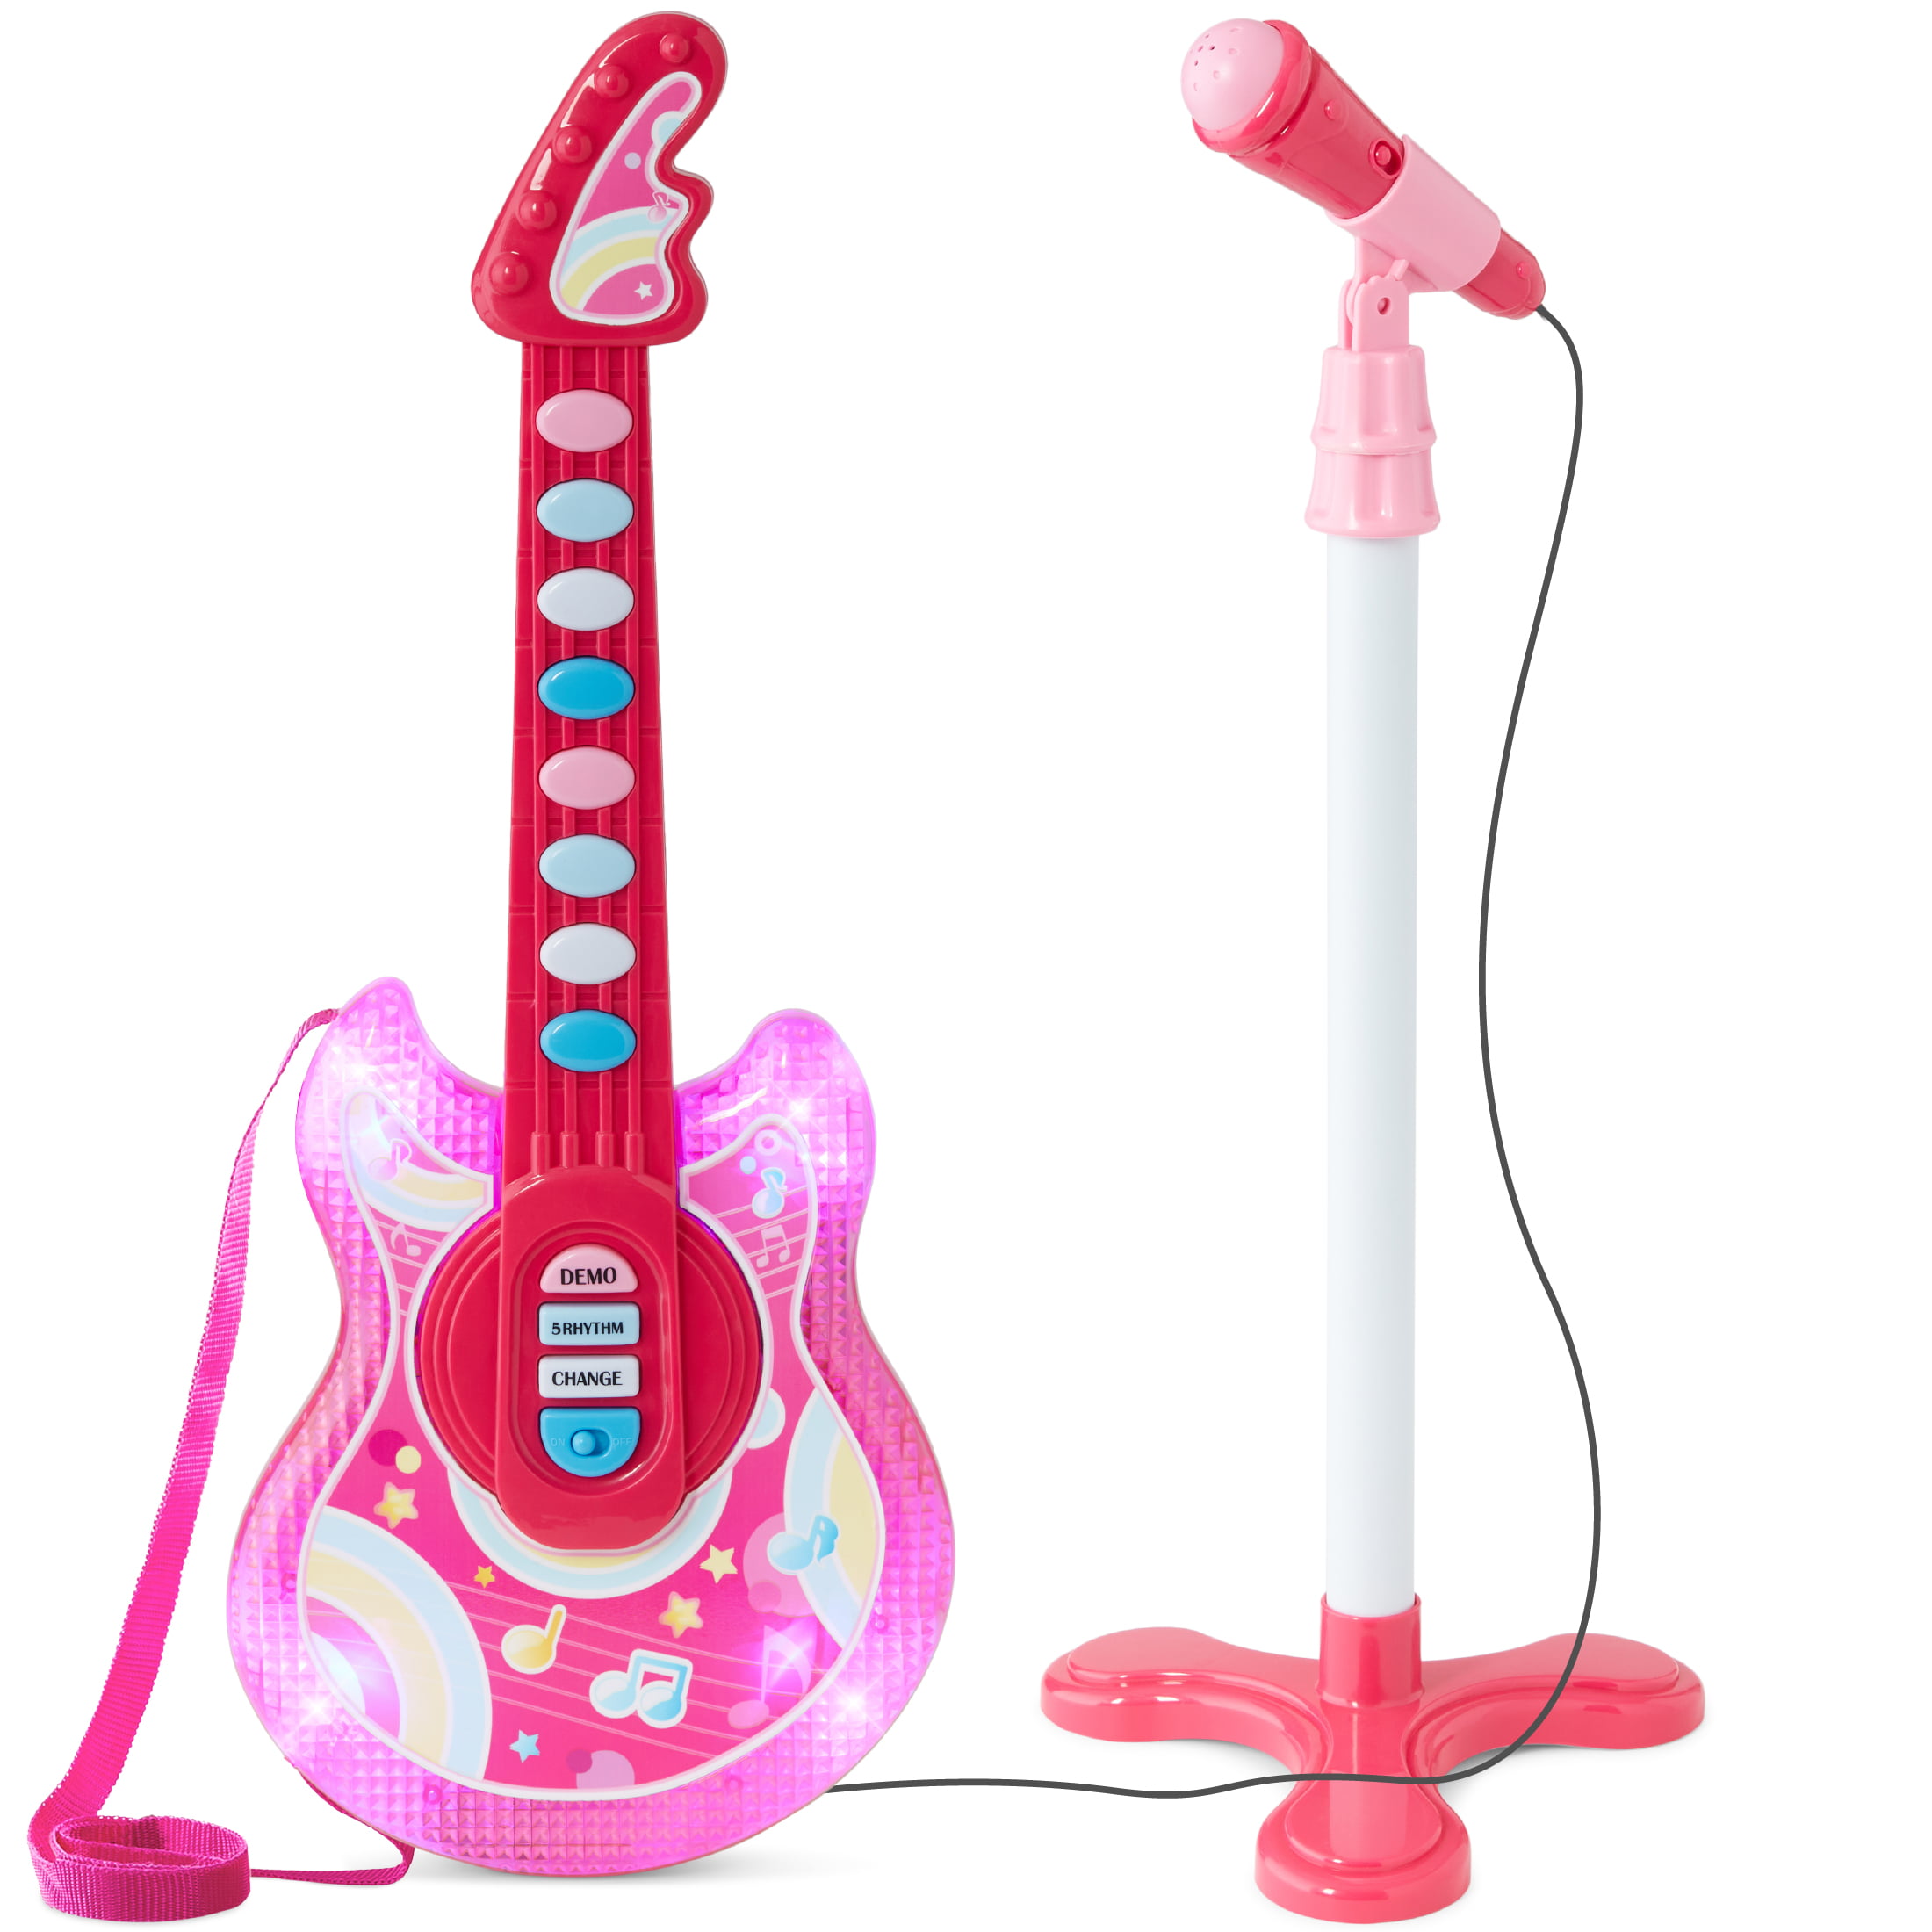 Rock N Roll Light Up & Sounds Guitar For Kids Children Gift Easy Play Toy New 